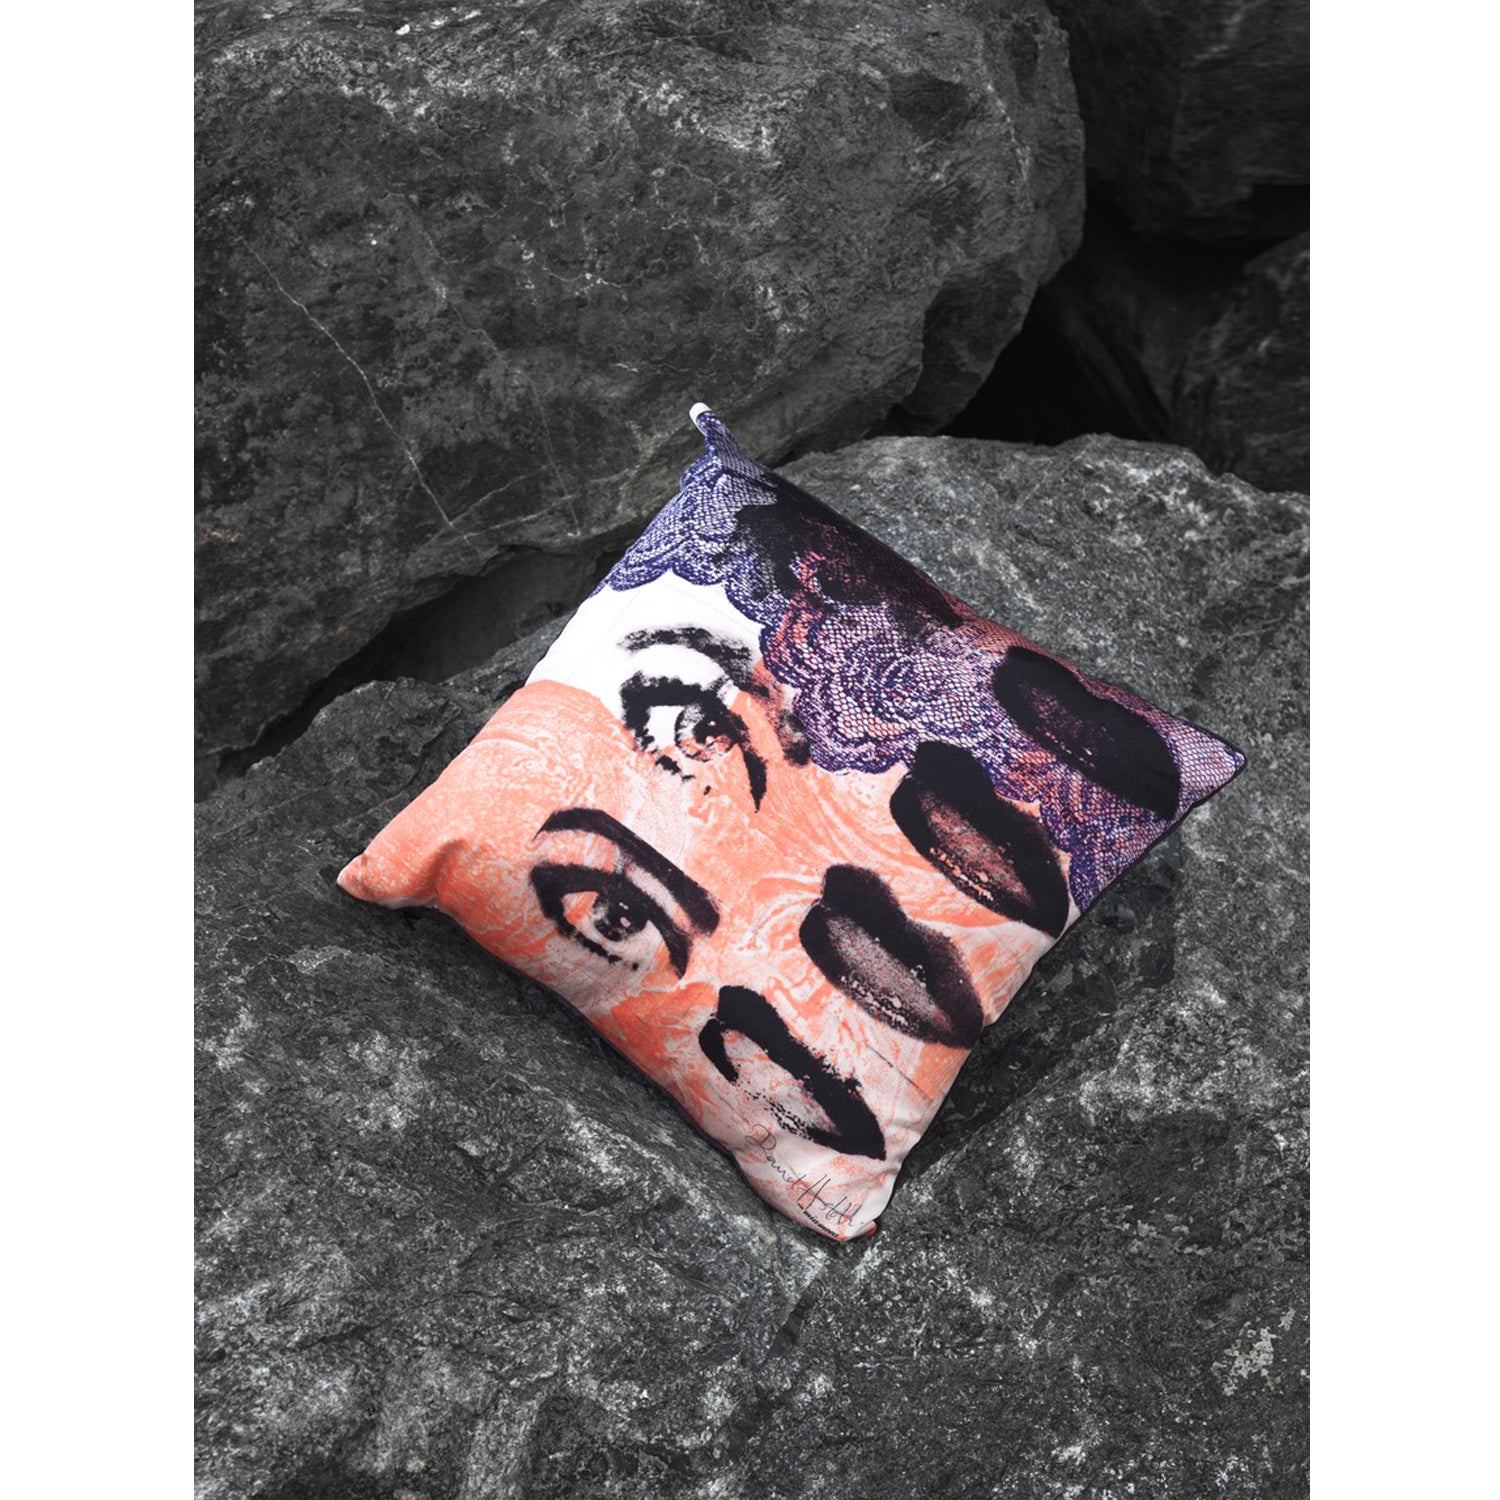 The Godess Collection of hand printed artworks by David Holah have been digitally replicated onto 100% silk cushion covers. 